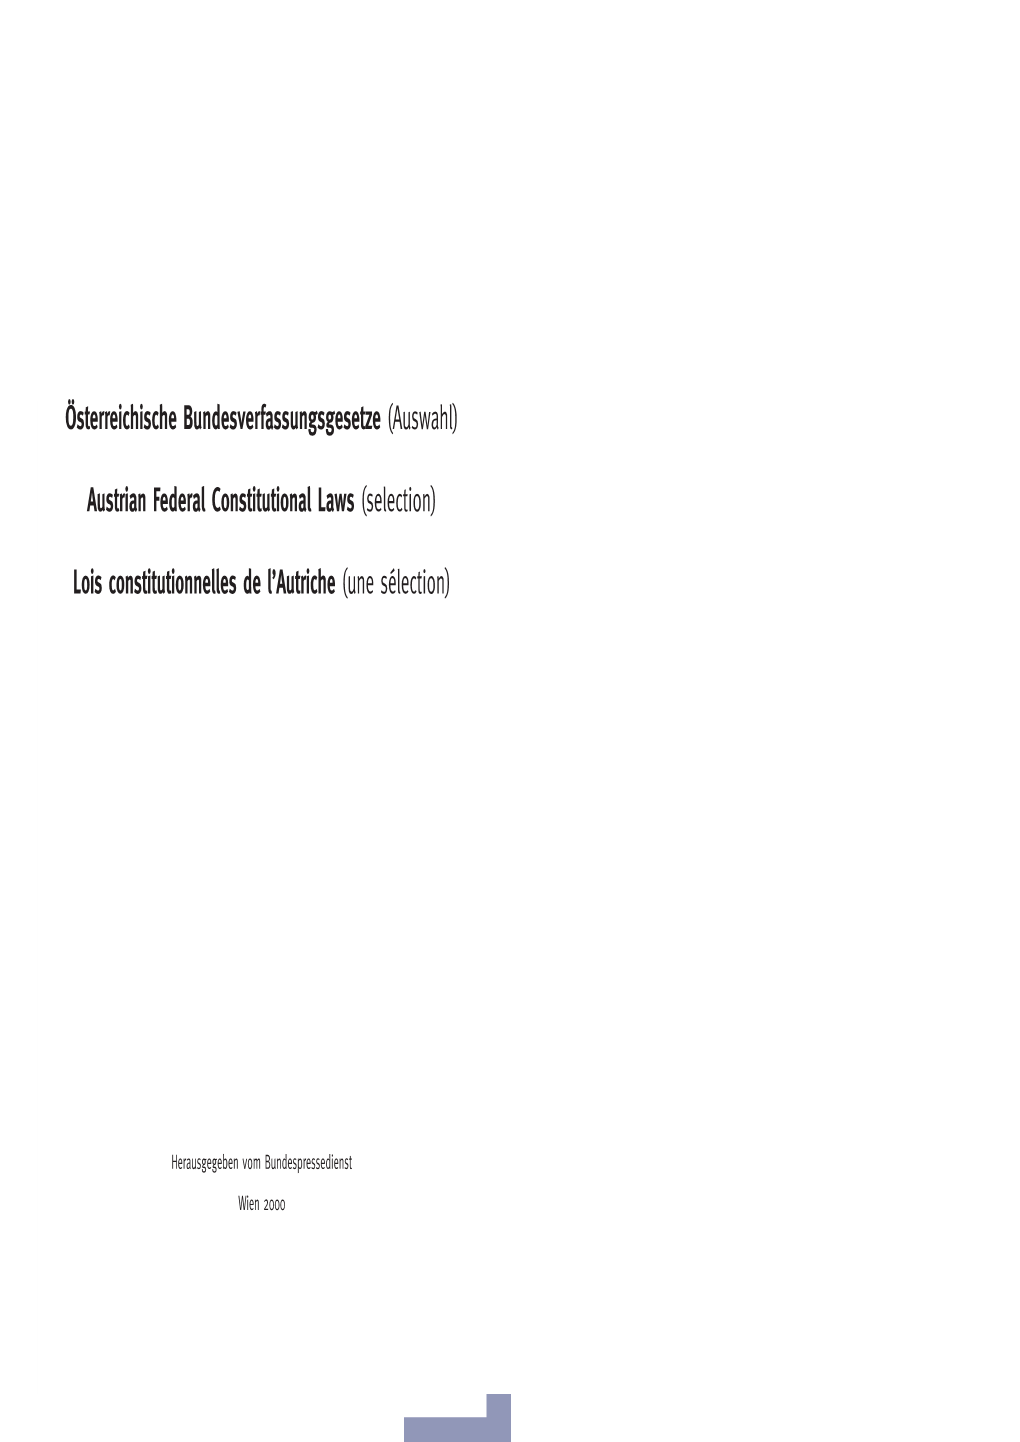 Austrian Federal Constitutional Laws (Selection)